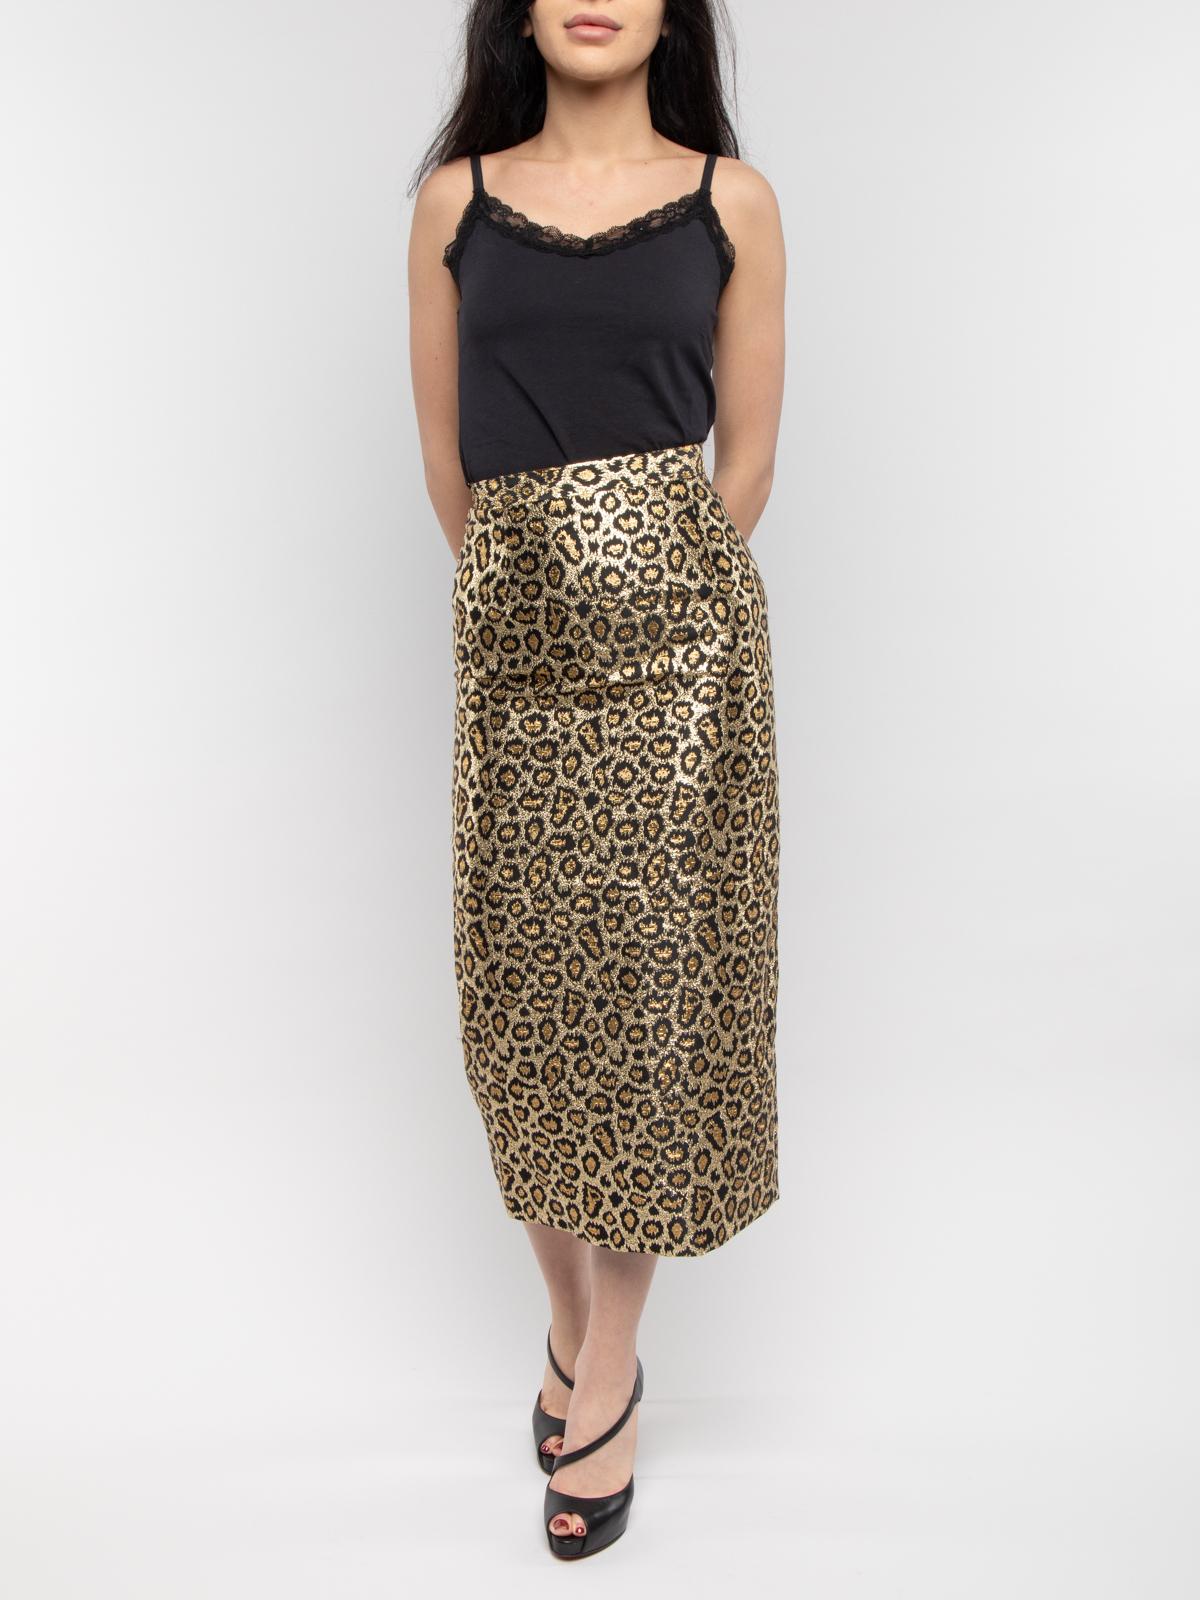 CONDITION is very good. No wear and pilling to skirt is evident. Details Gold Leopard Metallic Material Pencil Skirt Zip ClosureFastenting Made in ITALY. Composition 48% Polyester, 33% Fibres Metallised, 13% Silk, 6% Polyamide Lining: 100% Viscose